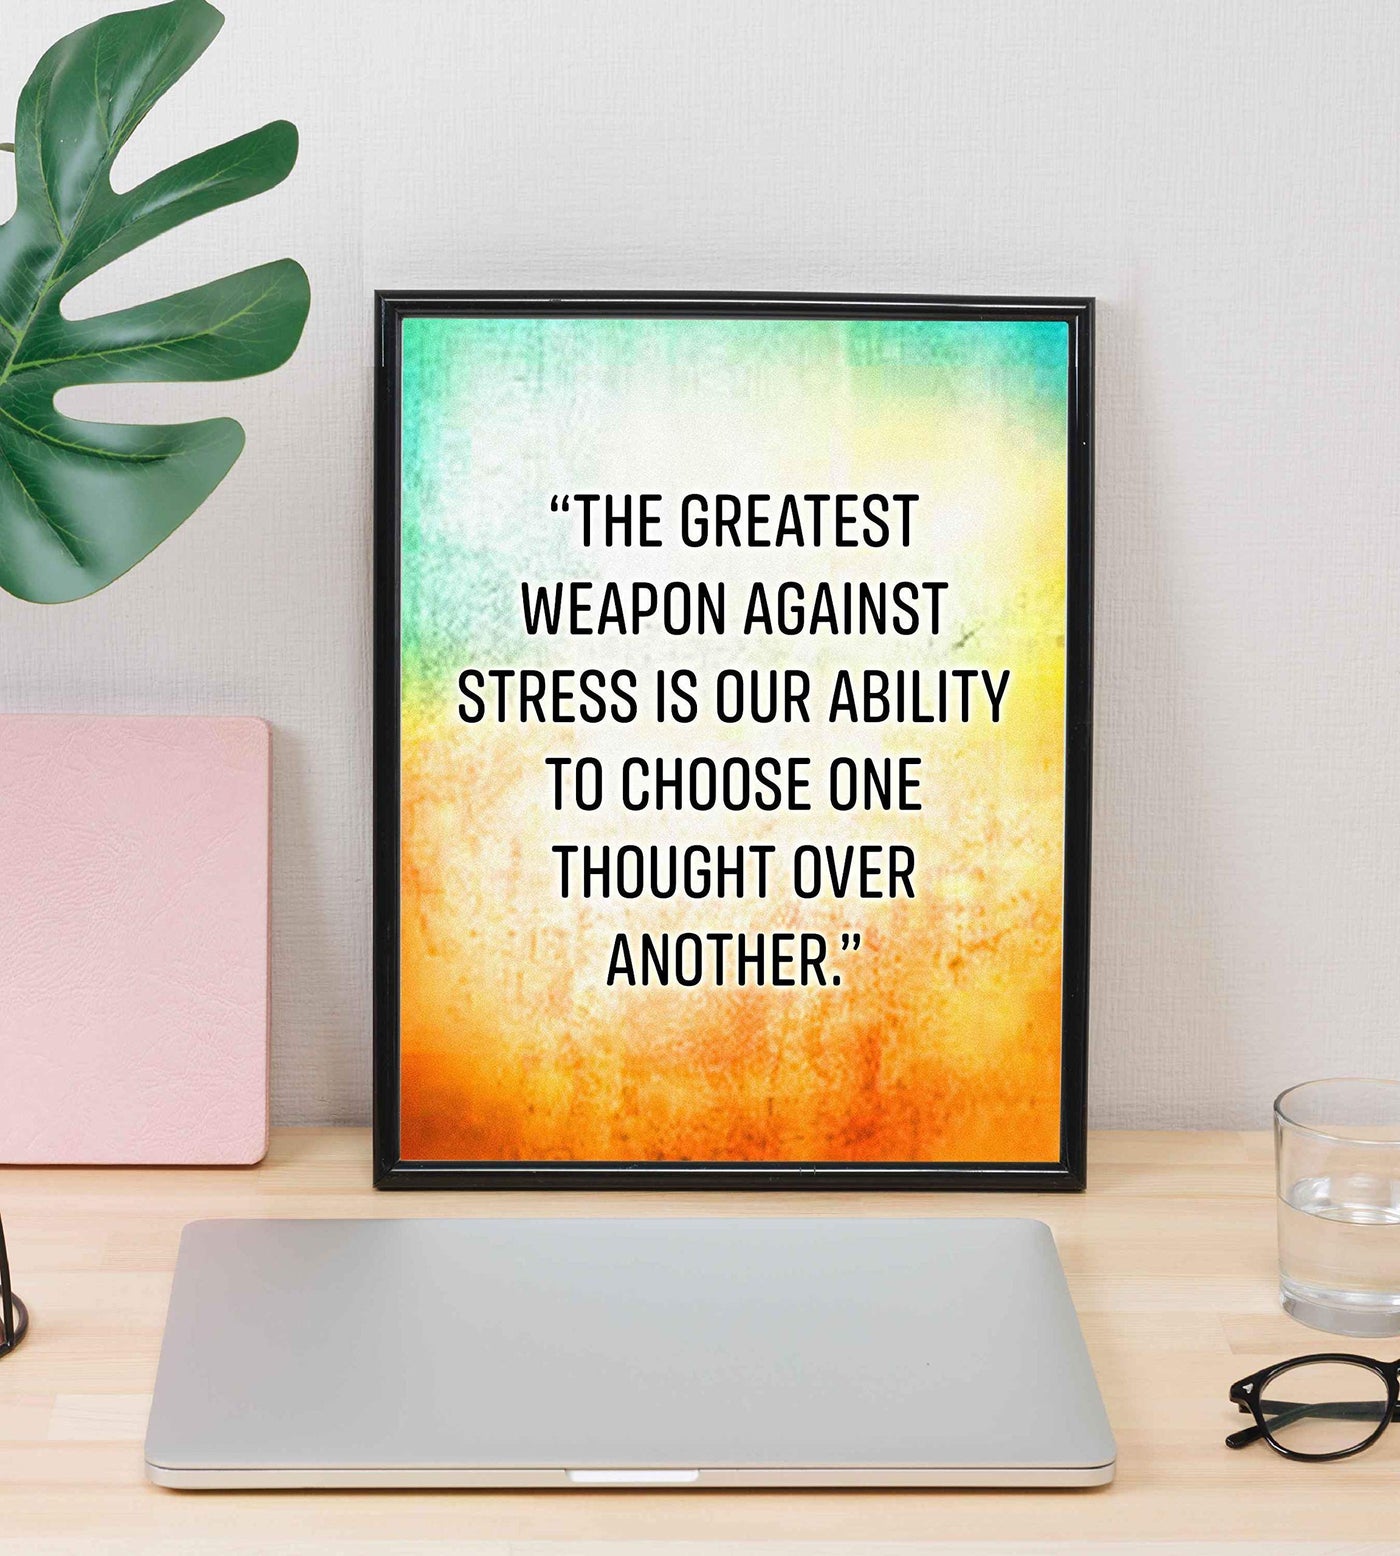 The Greatest Weapon Against Stress Motivational Quotes Wall Art -8 x 10" Modern Typographic Poster Print-Ready to Frame. Inspirational Home-Office-Classroom Decor. Choose Positive Thoughts!